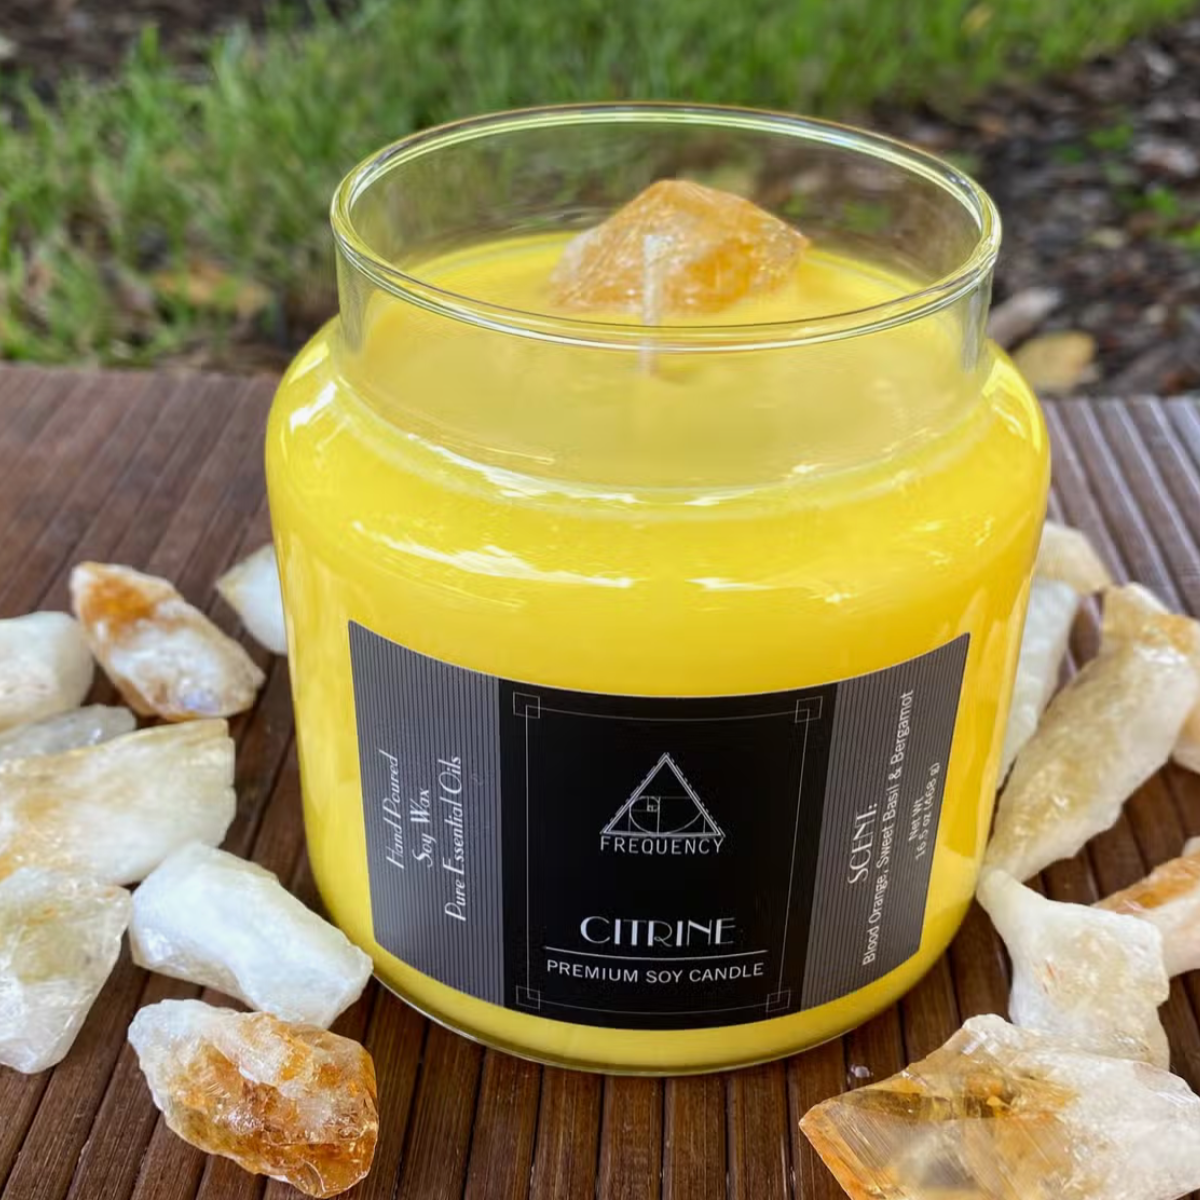 CITRINE WITH BLOOD ORANGE SWEET BASIL AND BERGAMOT ESSENTIAL OIL CANDLE